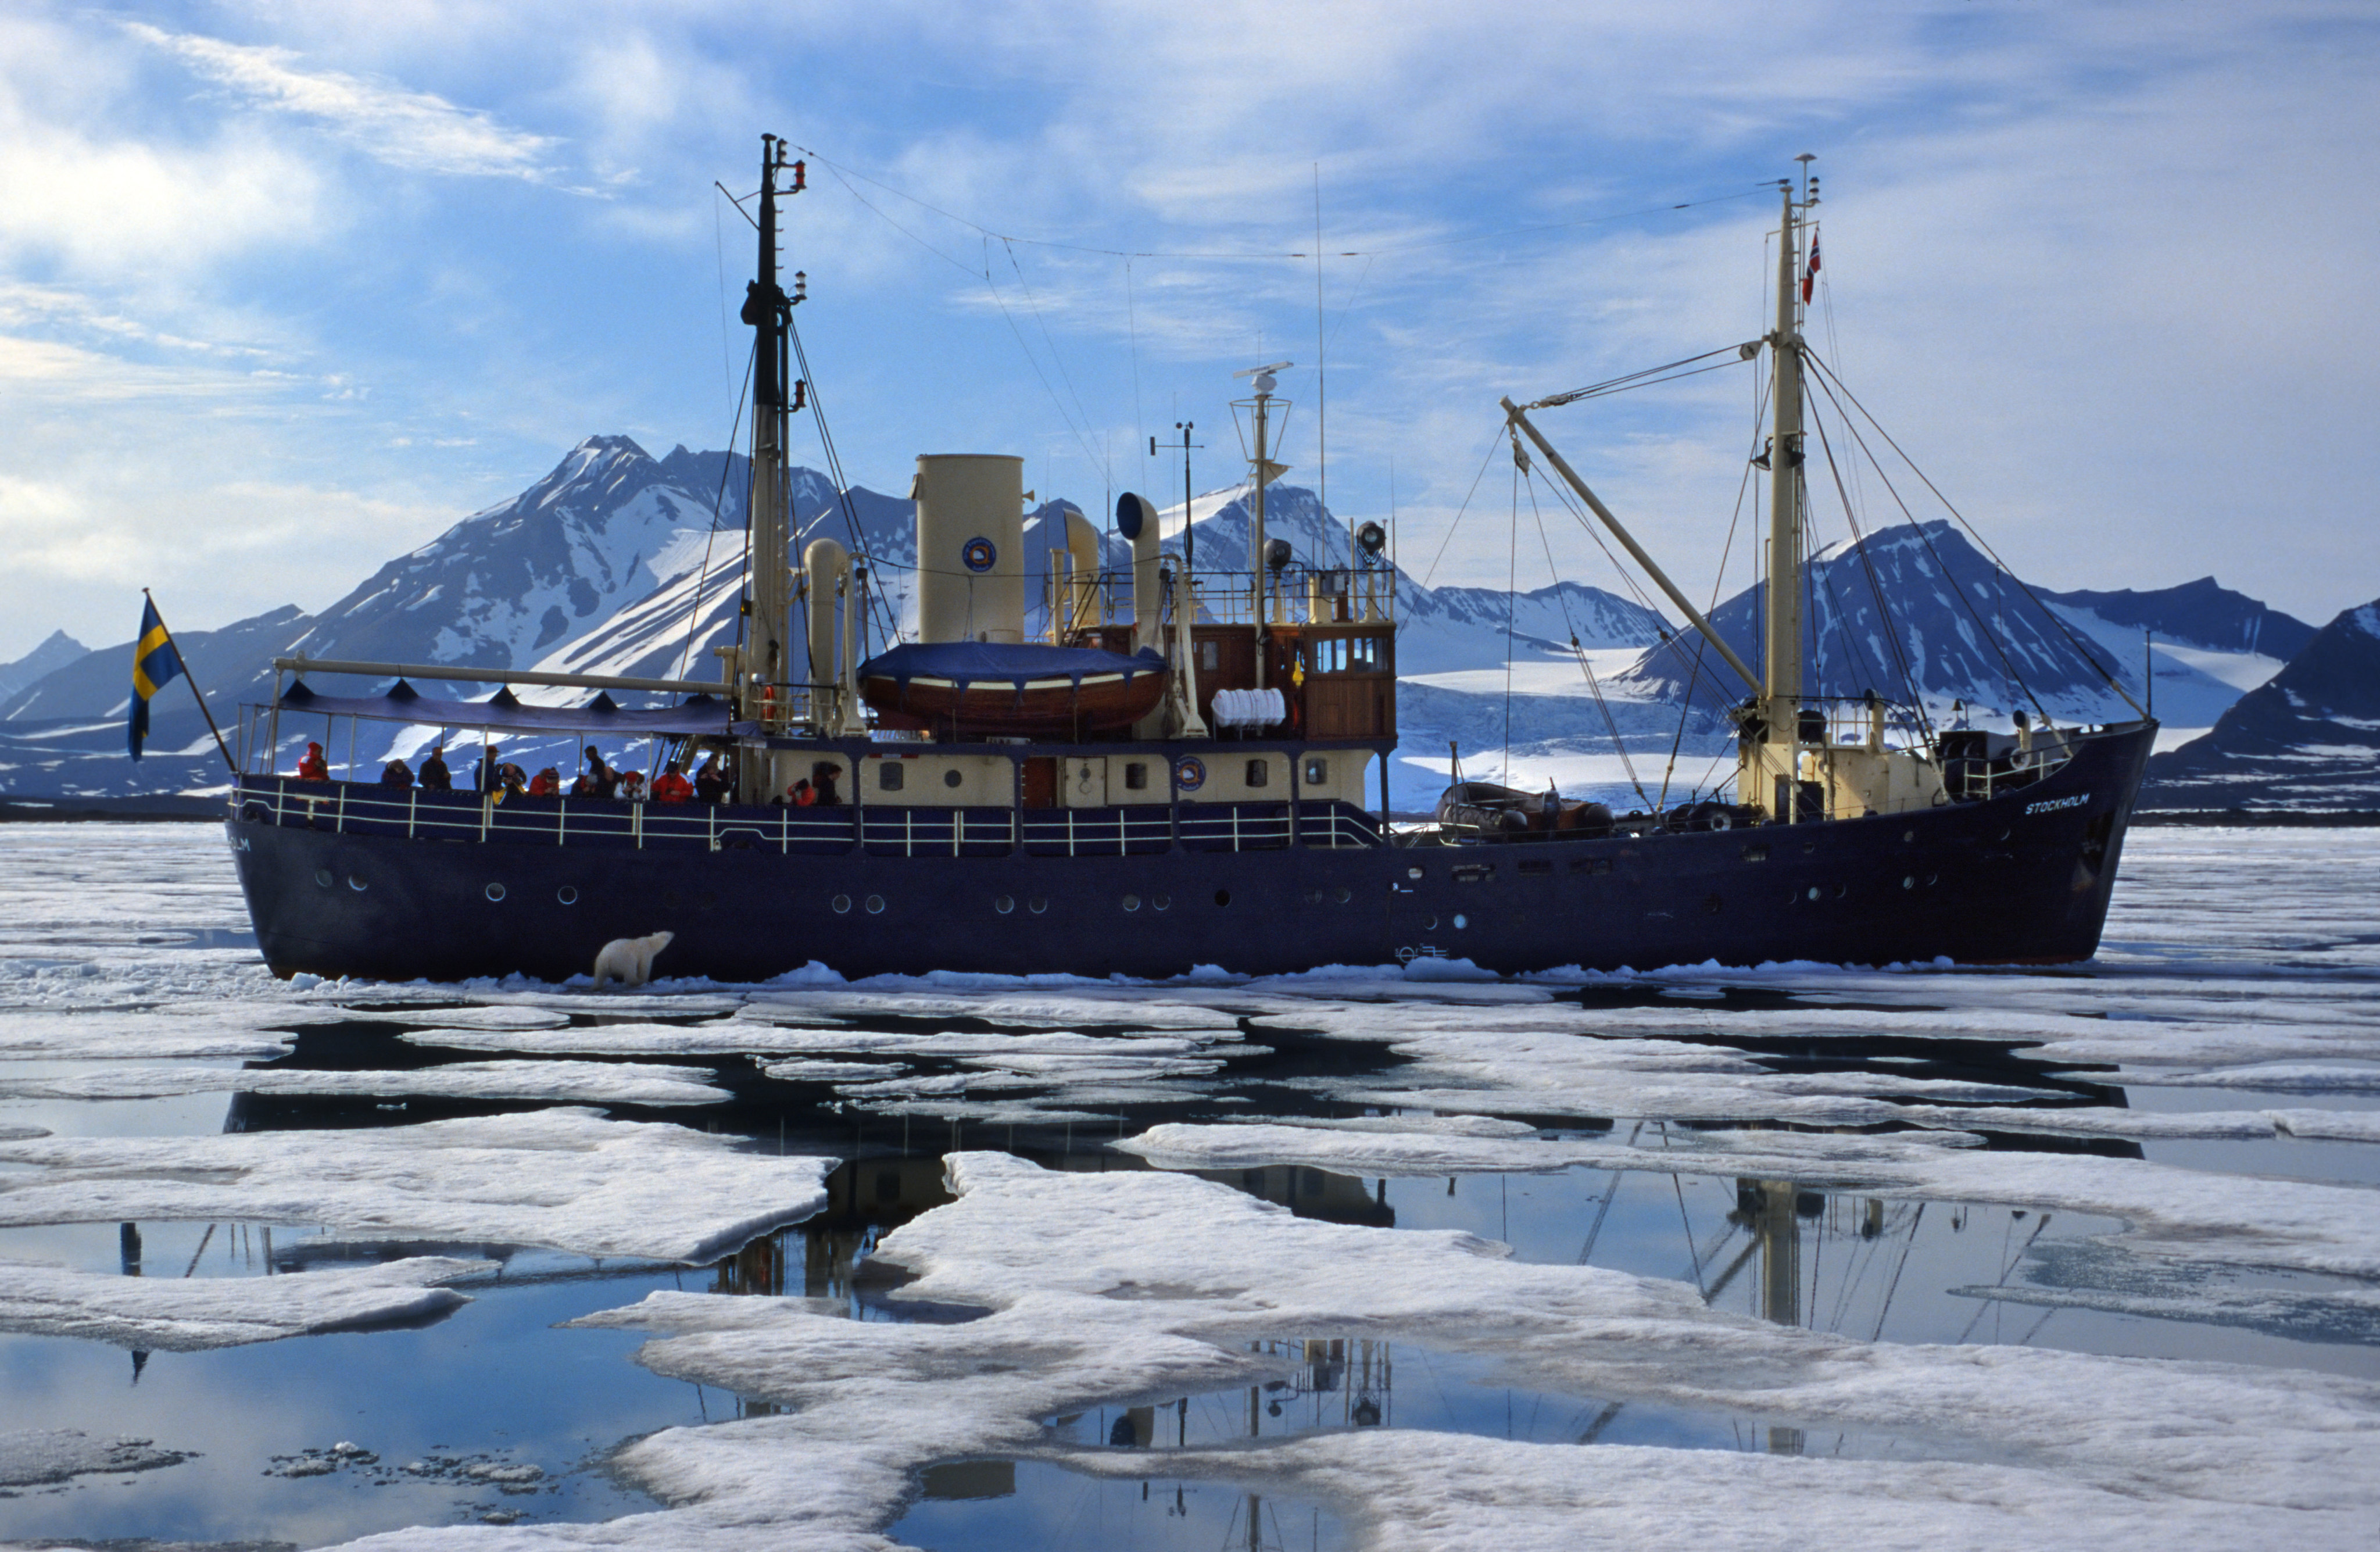 Eco tourists photographing curious Polar bear (Ursus maritimus / Thalarctos maritimus) from ship, Svalbard / Spitsbergen, Norway. (Photo by: Arterra/Universal Images Group via Getty Images)